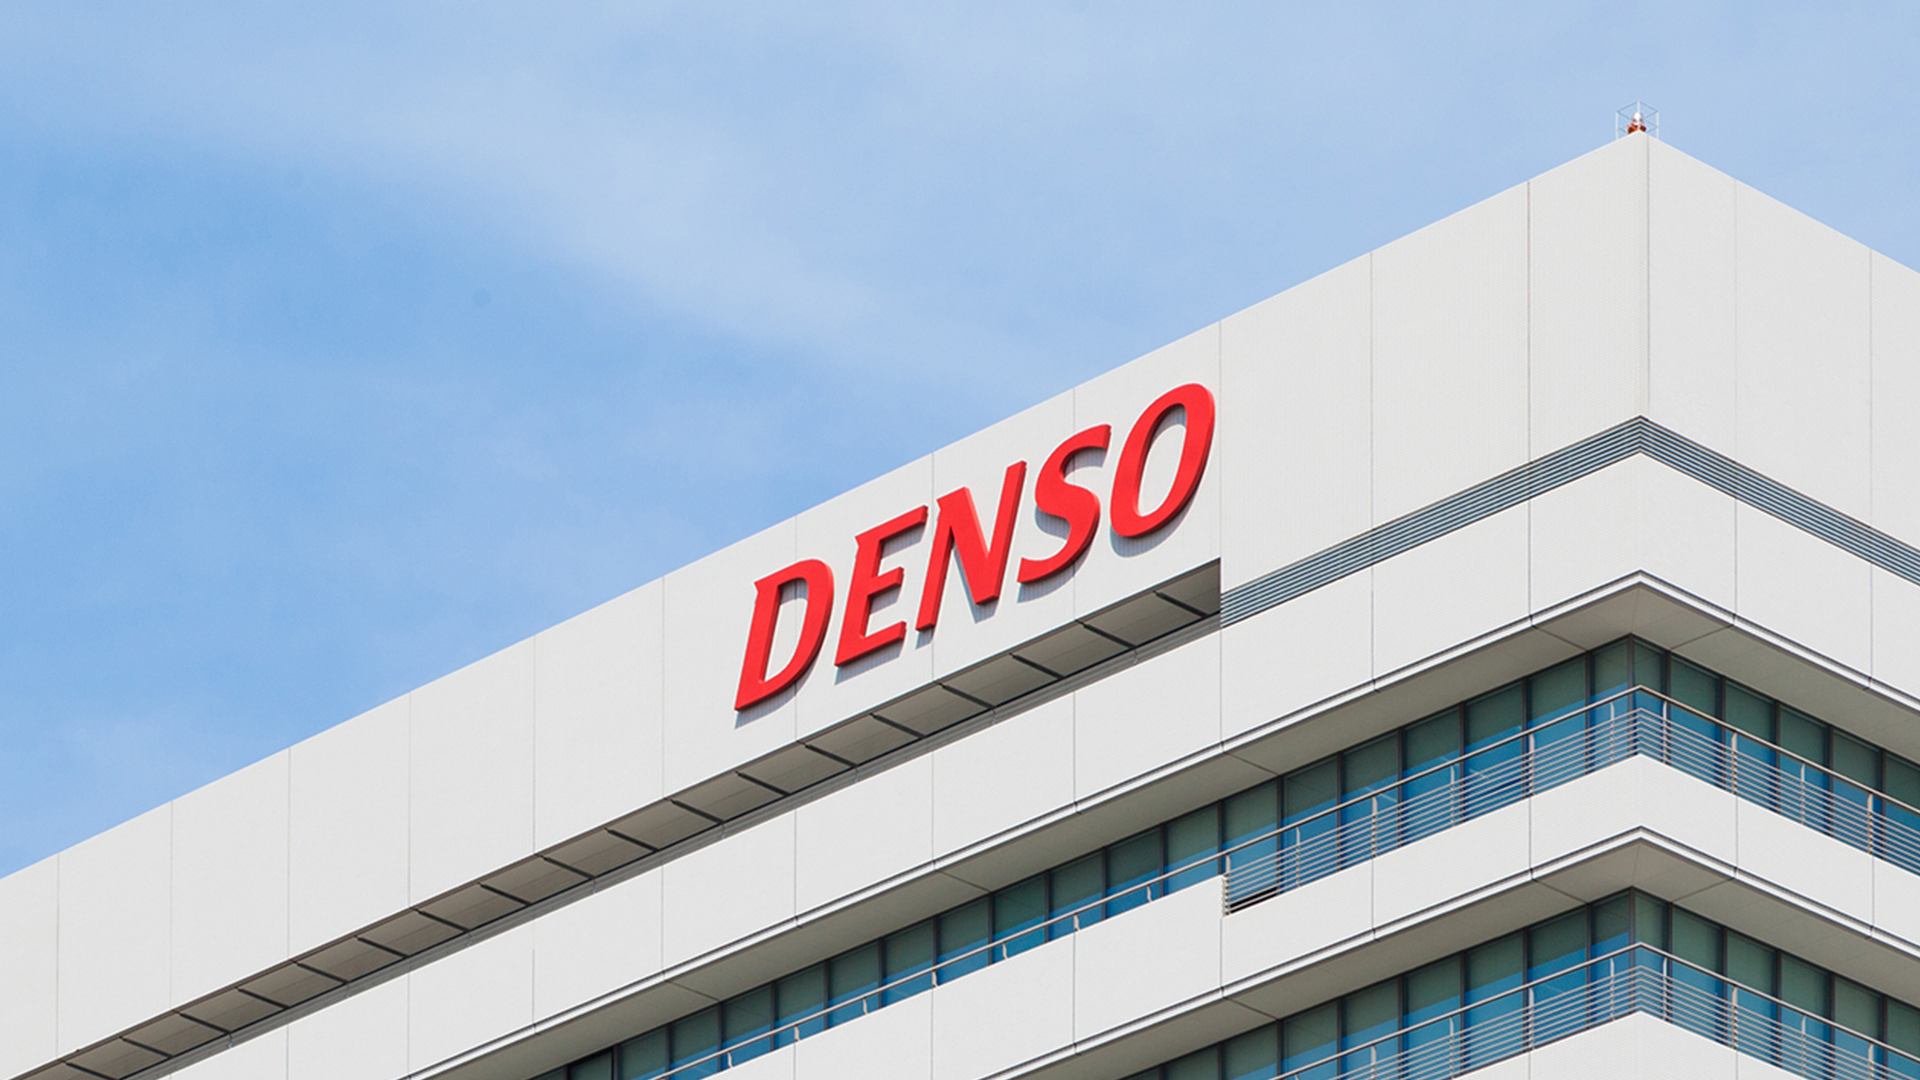 Denso signs agreement with PAOT